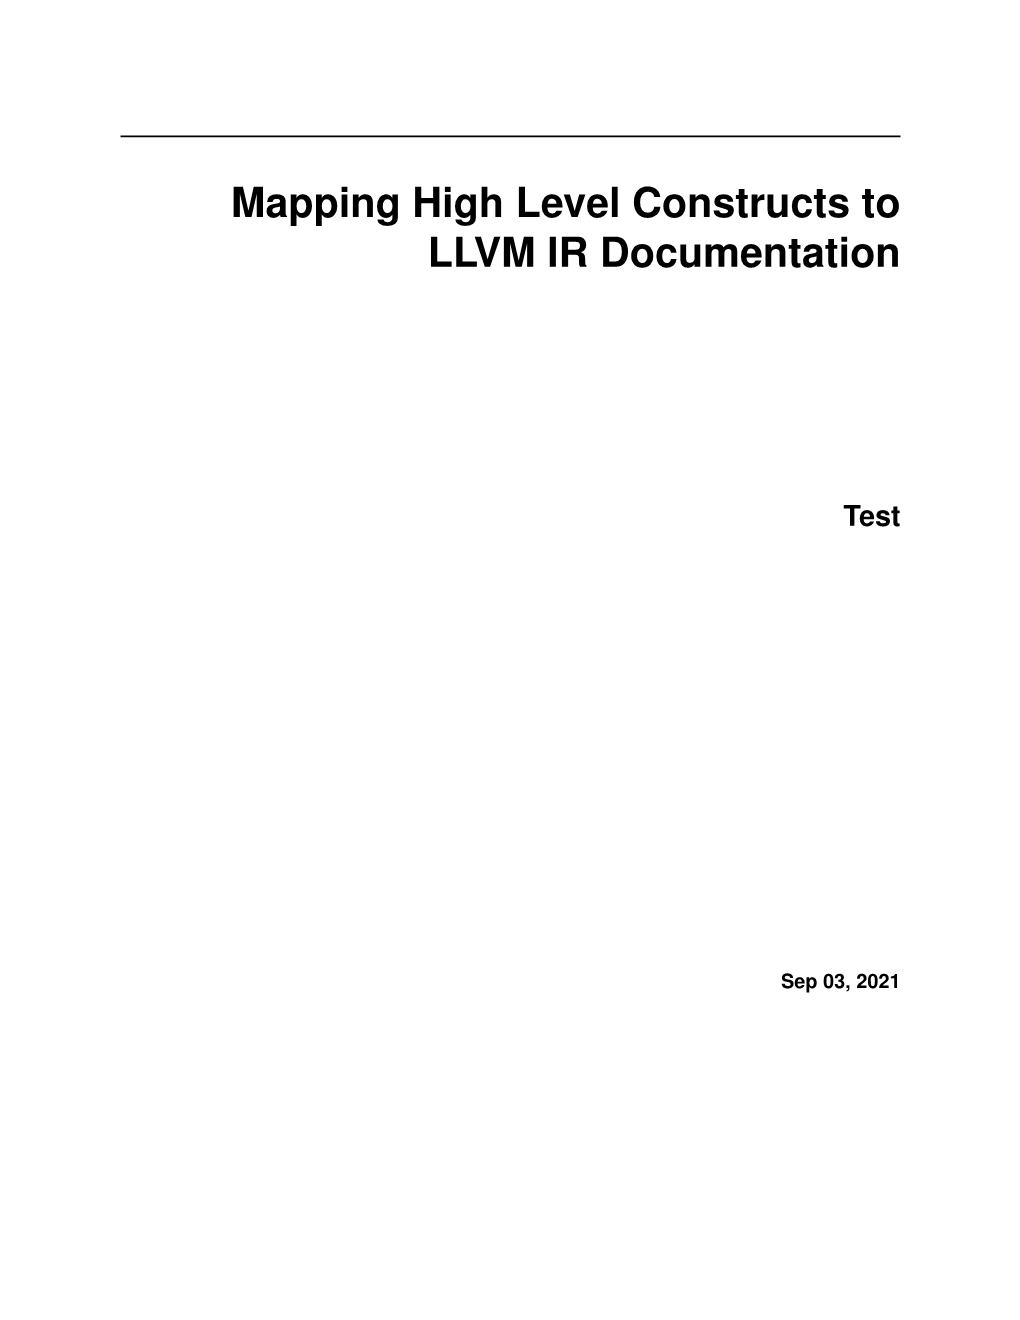 Mapping High Level Constructs to LLVM IR Documentation